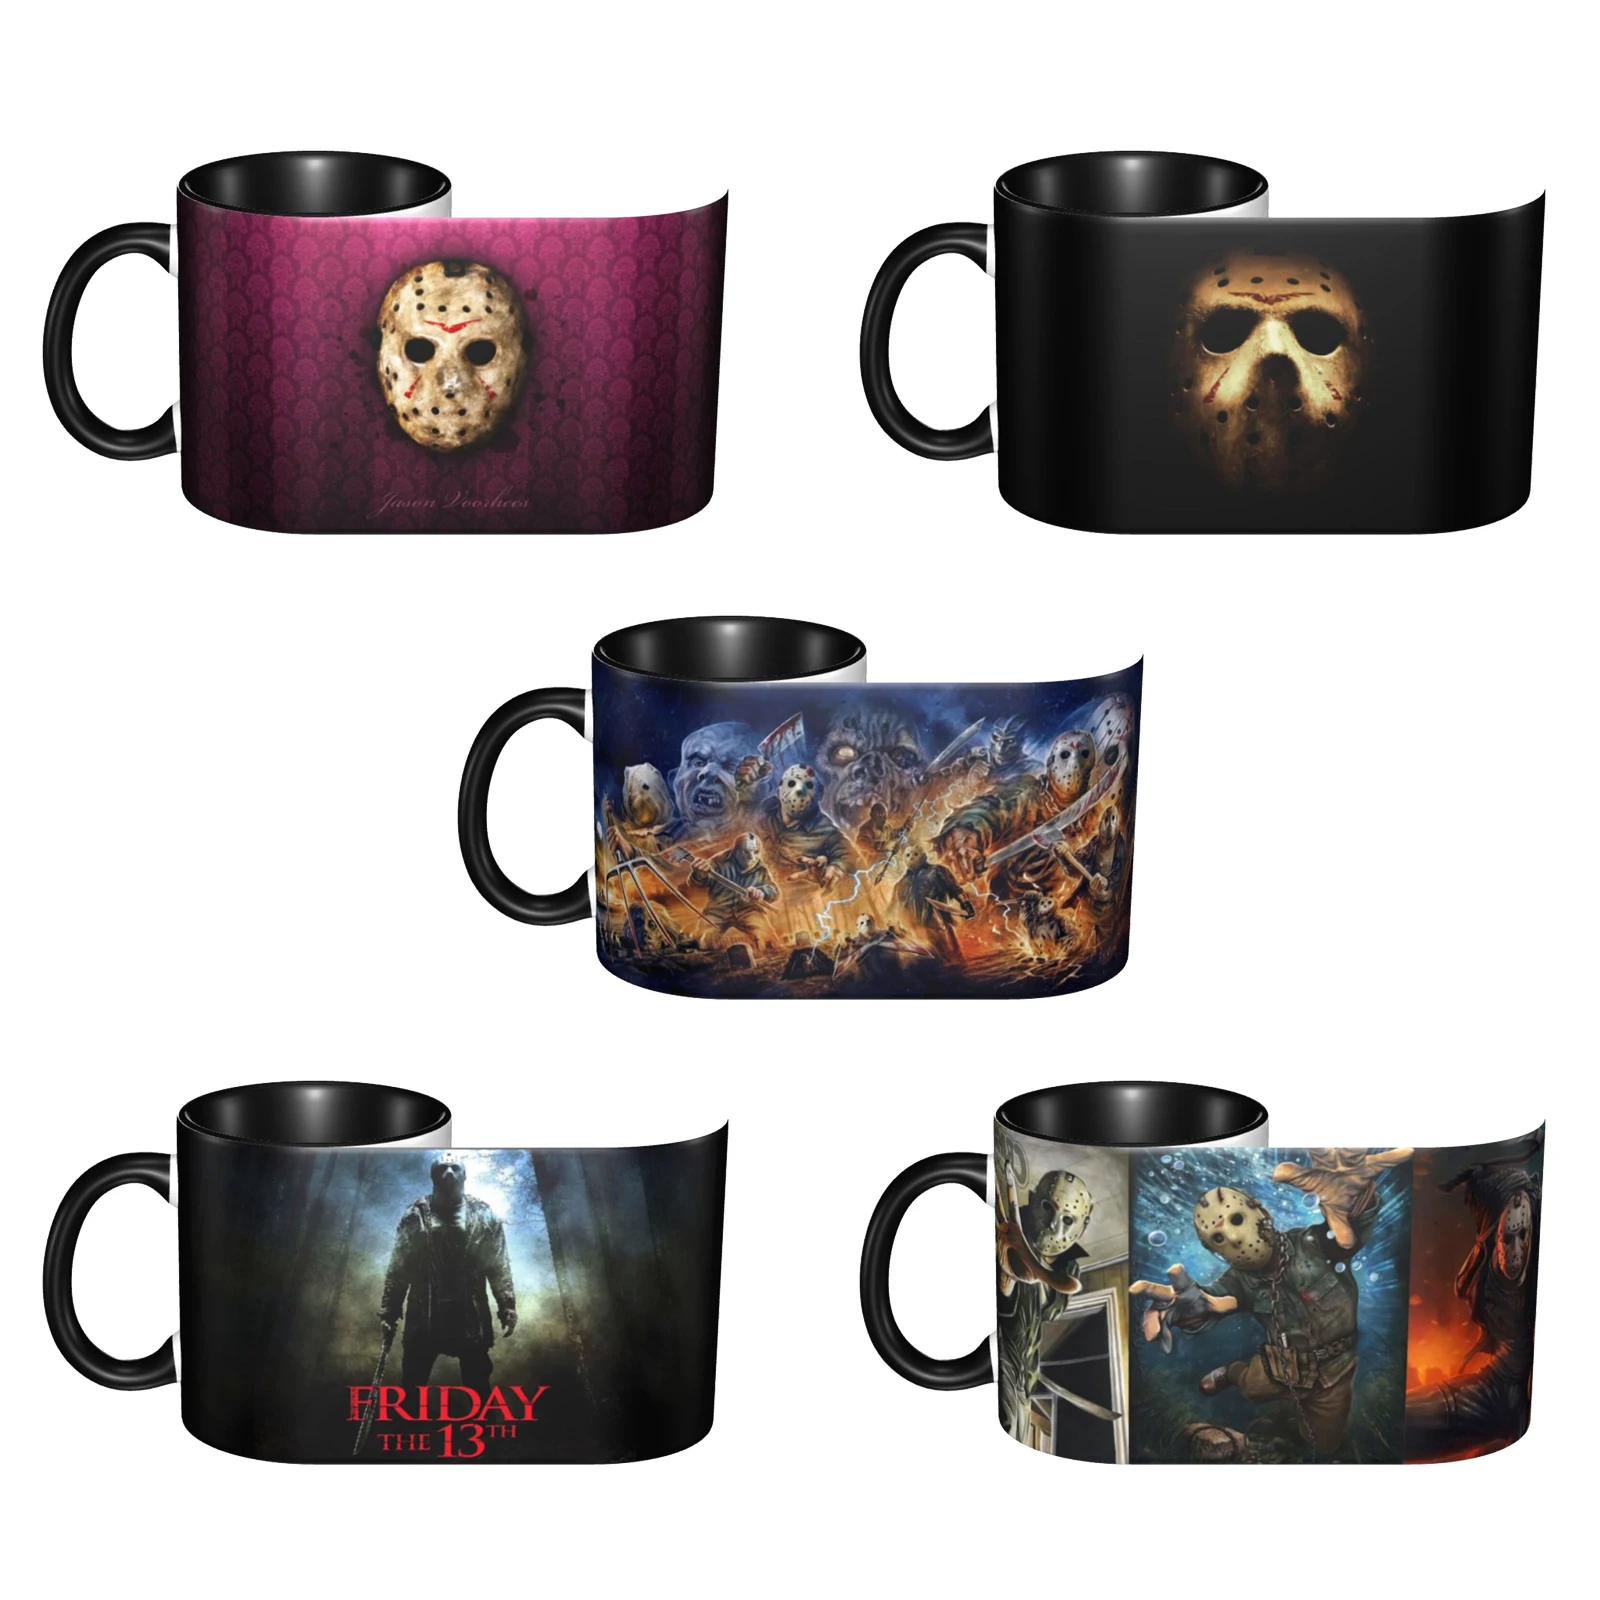 

Horror Movie Friday The 13th Jason Voorhees 11 OZ Ceramic Coffee Mug with Handle Tea Cup for Cocoa Milk Cereal Drinks Mug